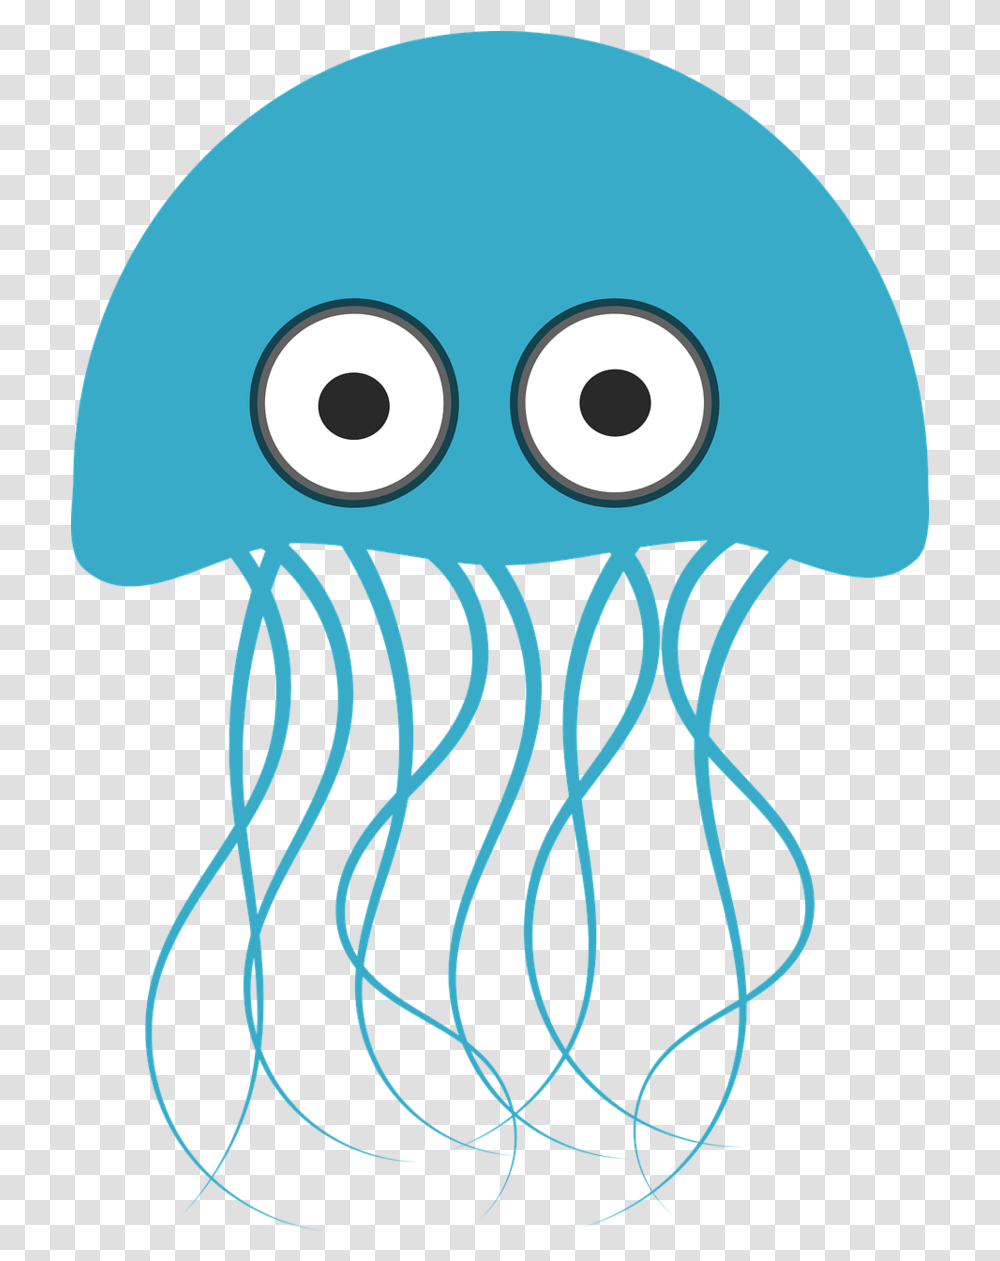 Jelly Fish Are They Edible Cartoon Jellyfish Background, Sea Life, Animal, Invertebrate Transparent Png